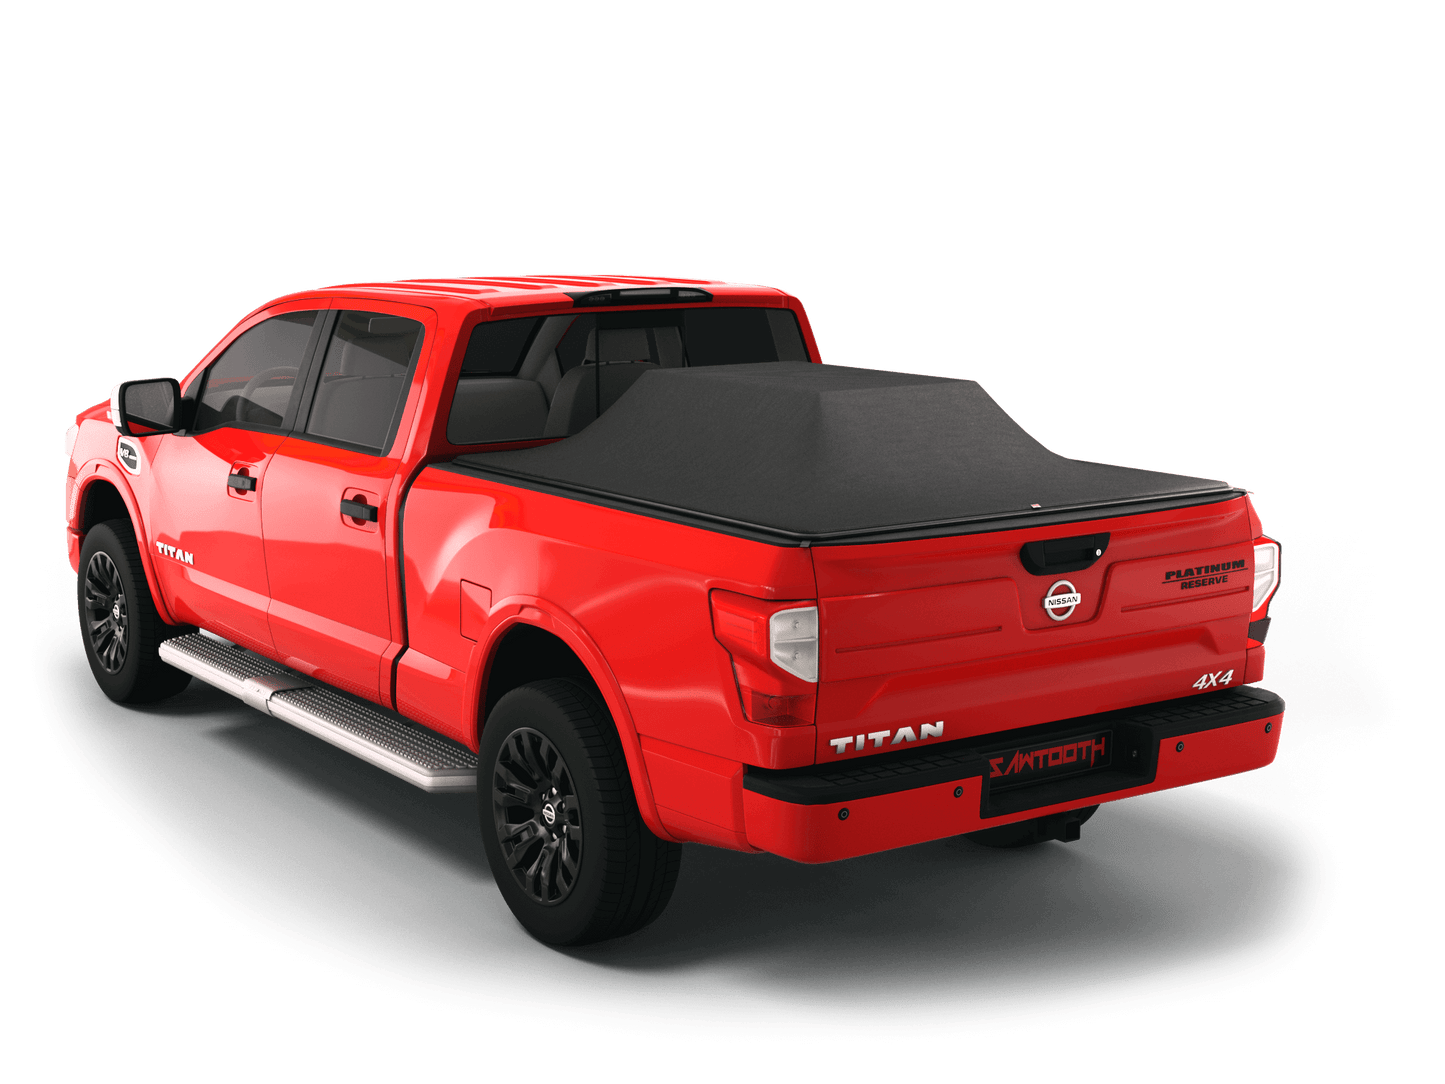 Red Nissan Titan with loaded and expanded Sawtooth Stretch pickup truck bed cover